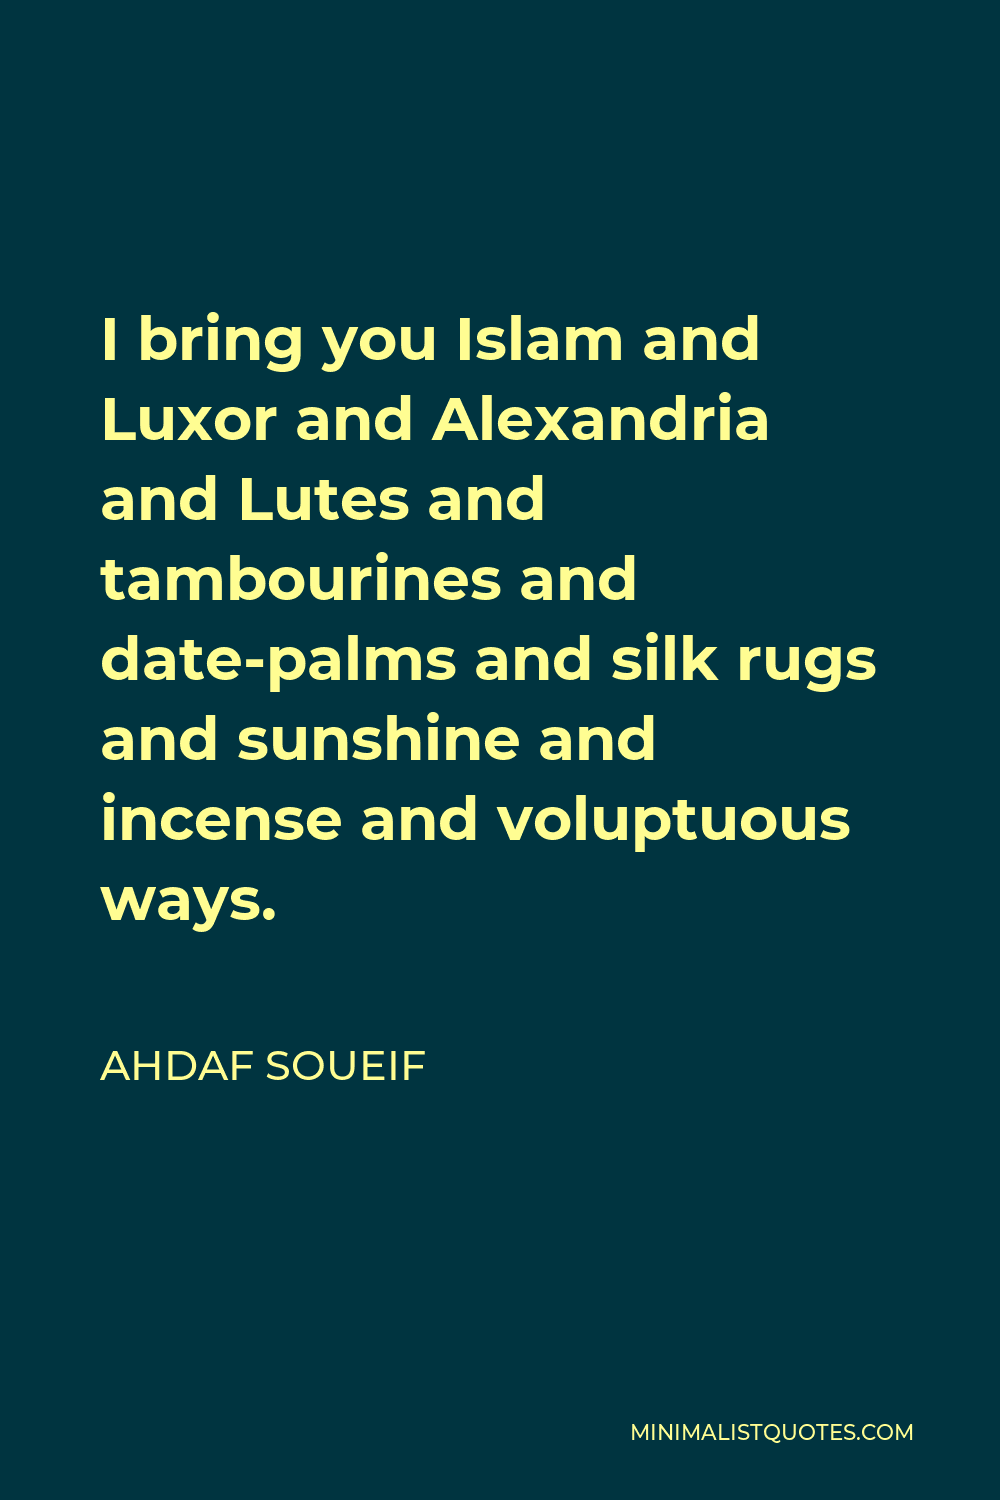 Ahdaf Soueif Quote - I bring you Islam and Luxor and Alexandria and Lutes and tambourines and date-palms and silk rugs and sunshine and incense and voluptuous ways.